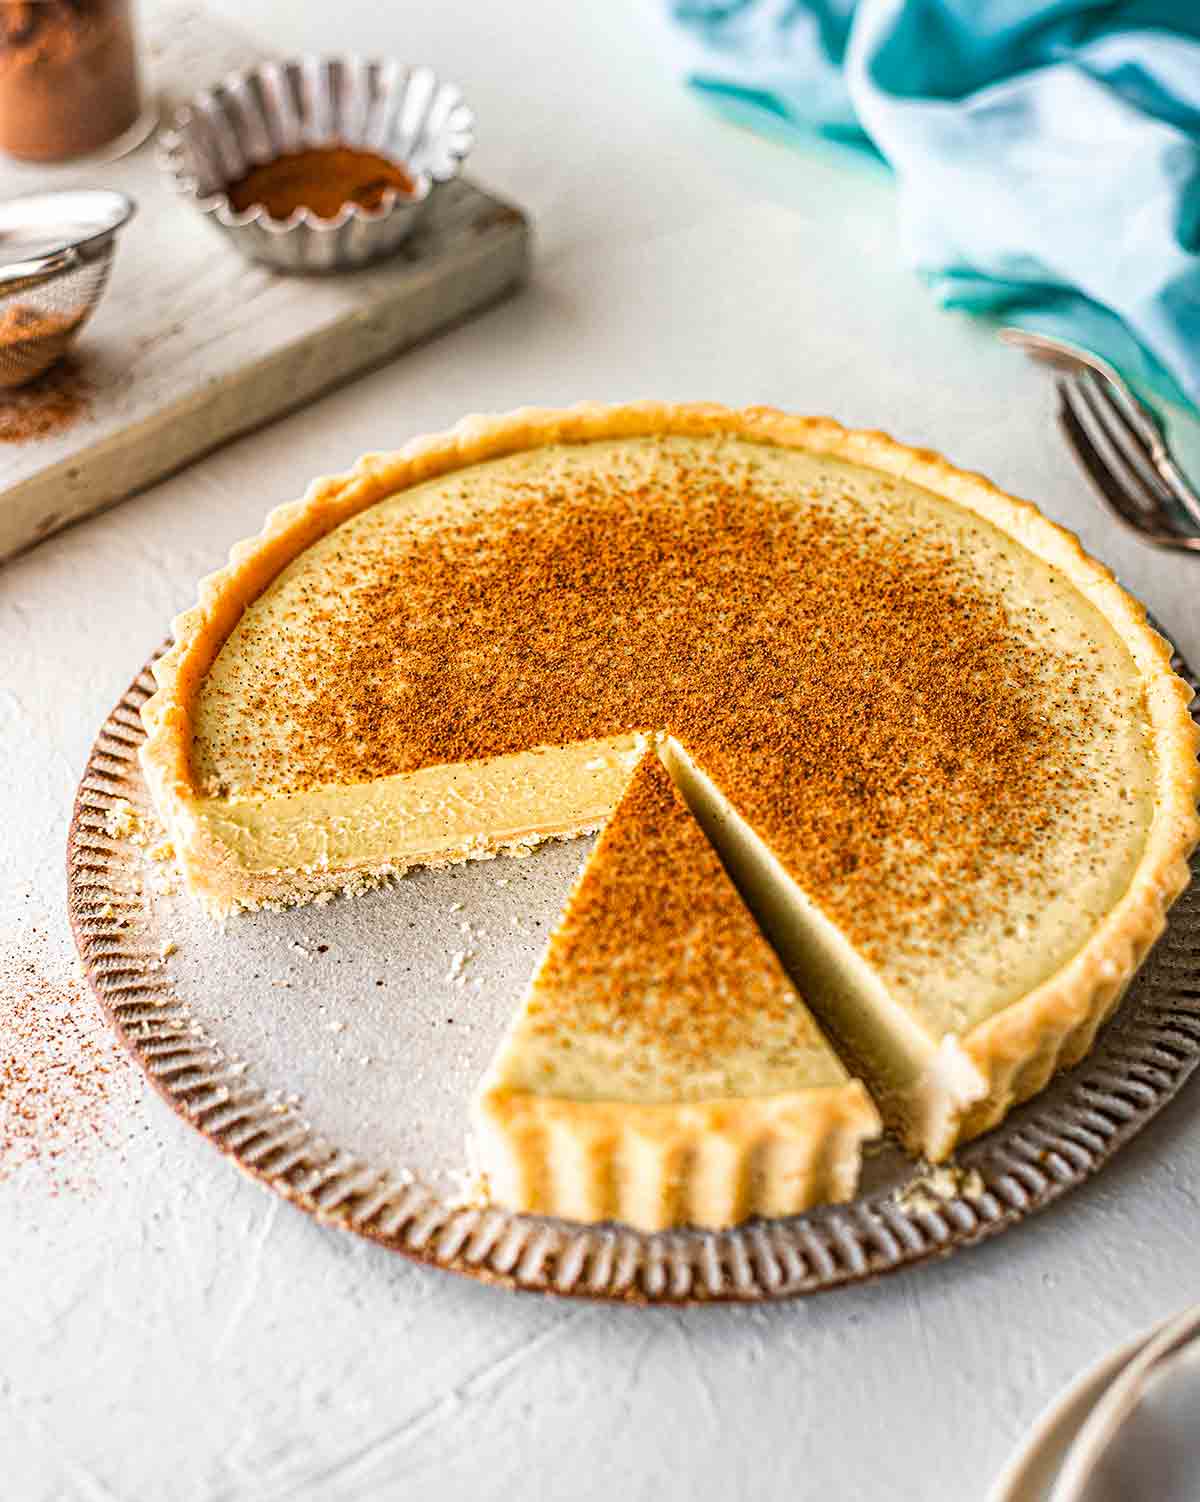 45 degree angle photo of vegan custard tart. Two slices taken out showing creamy and thick texture of custard pie.